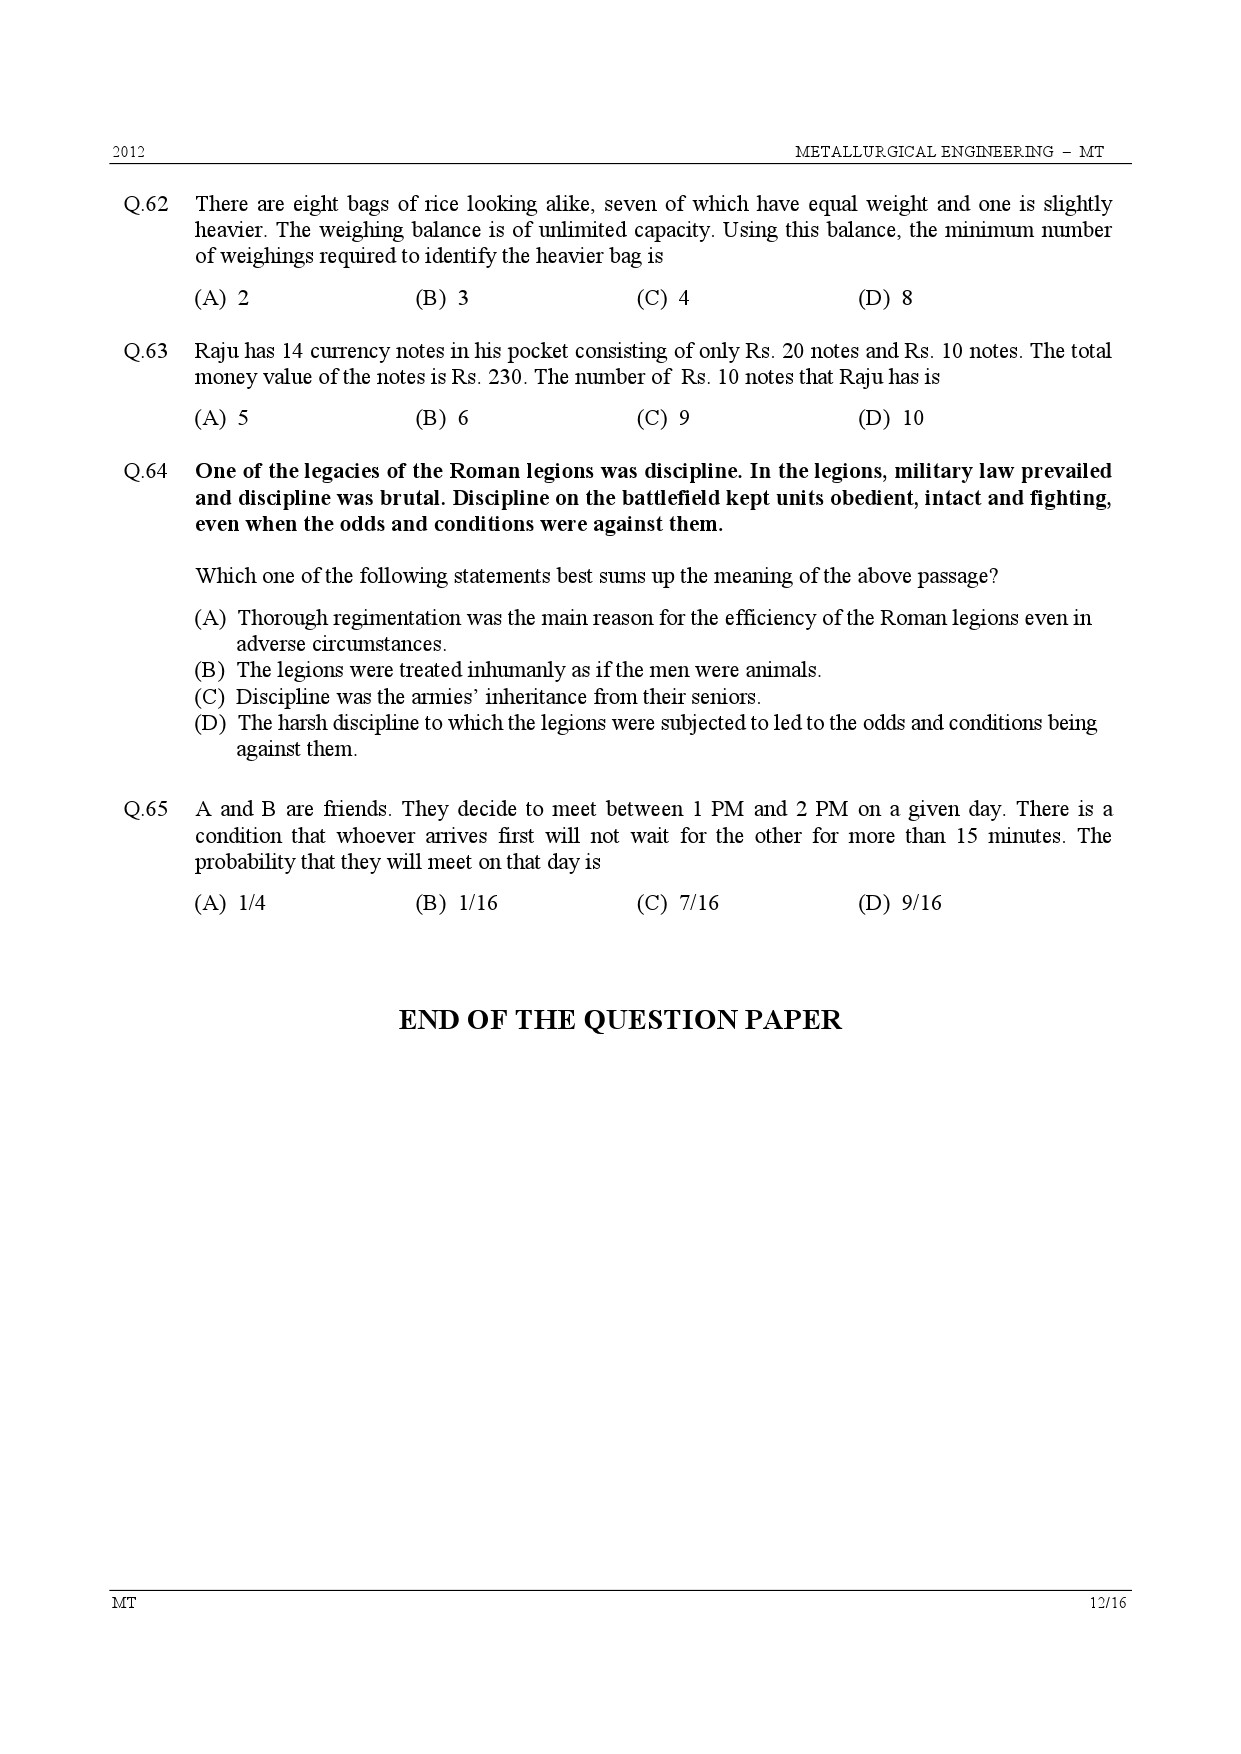 GATE Exam Question Paper 2012 Metallurgical Engineering 12